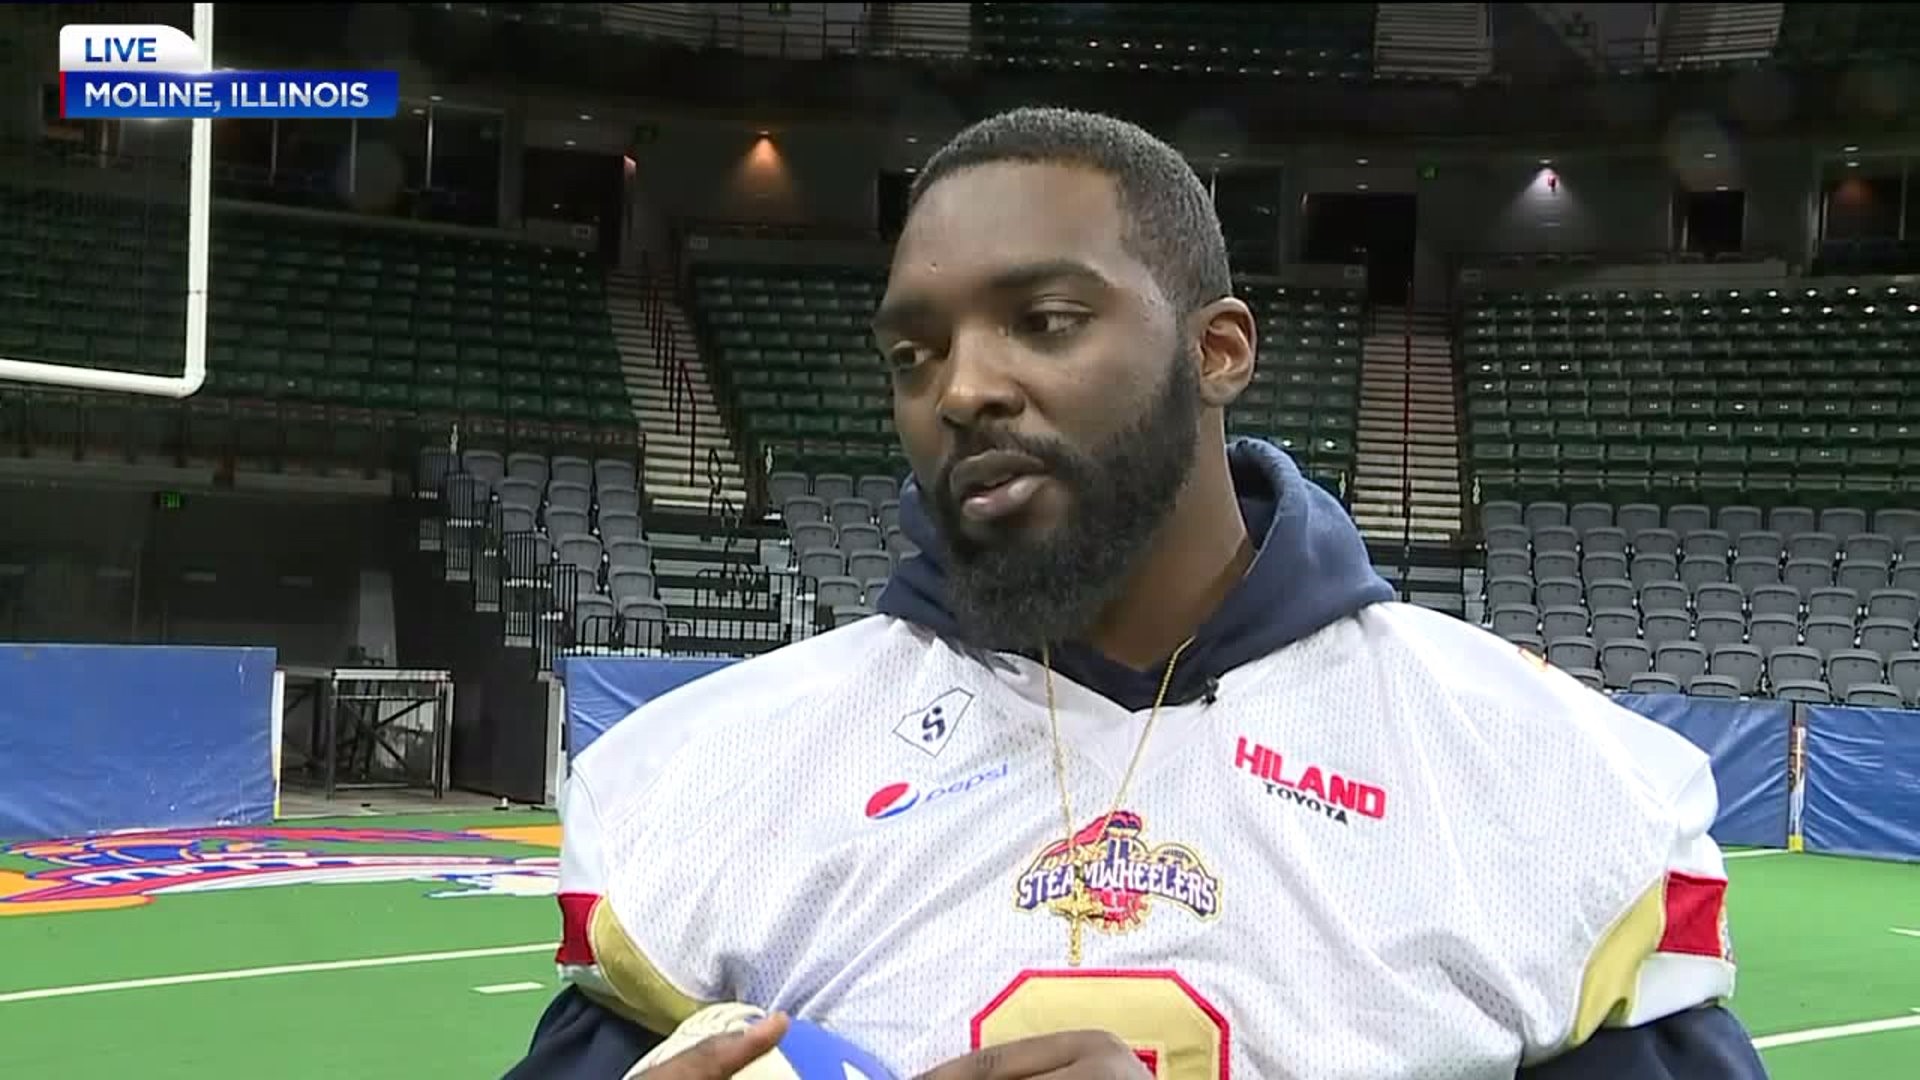 GMQC meets with the Quad City Steamwheelers